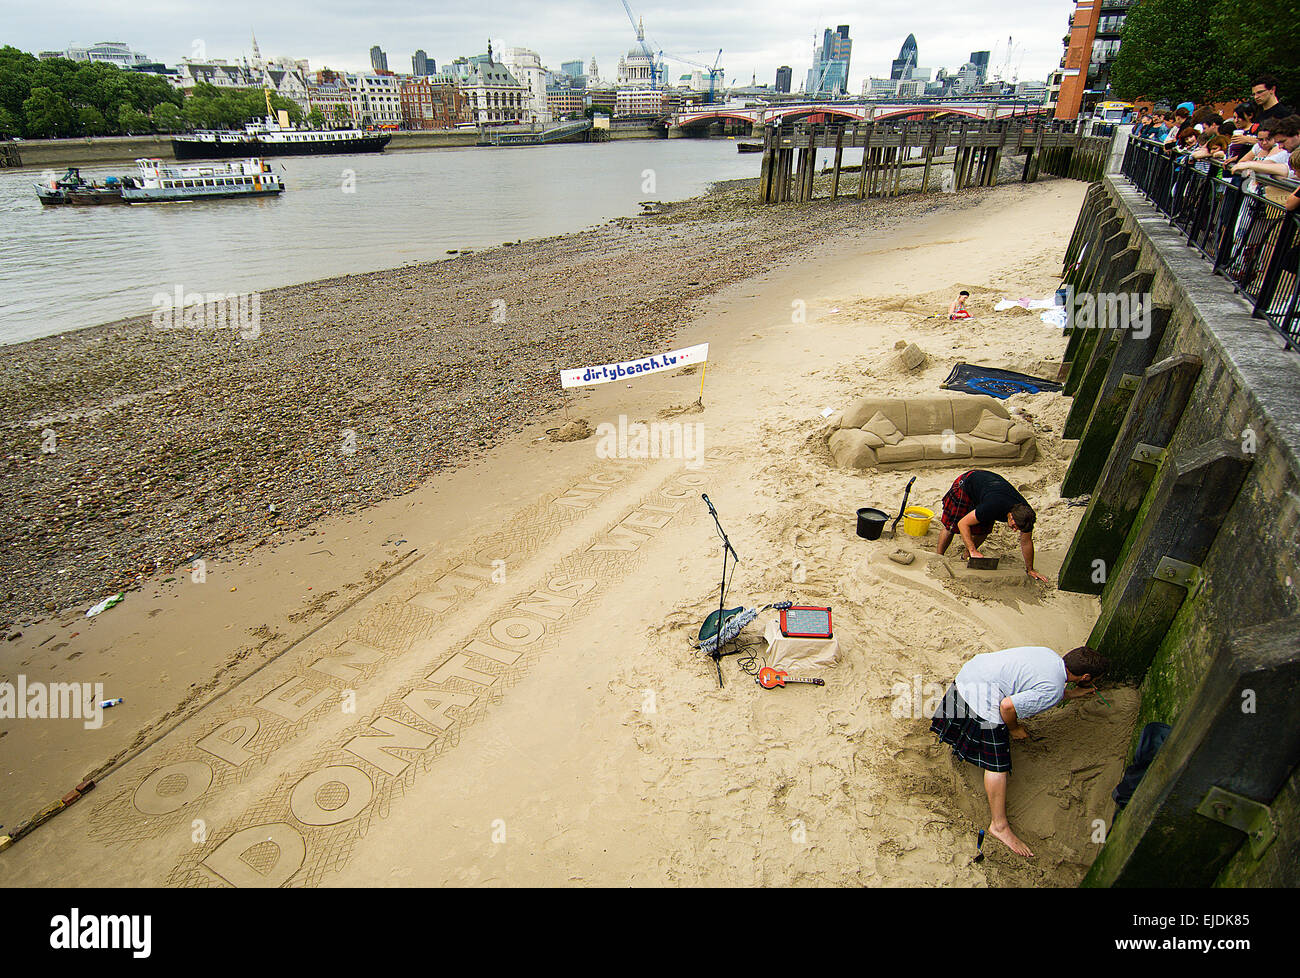 Sand sculpture on the Thames river bank at low tide by Dirtybeach TV, whose aim in life is to clean up beaches and rivers. Stock Photo